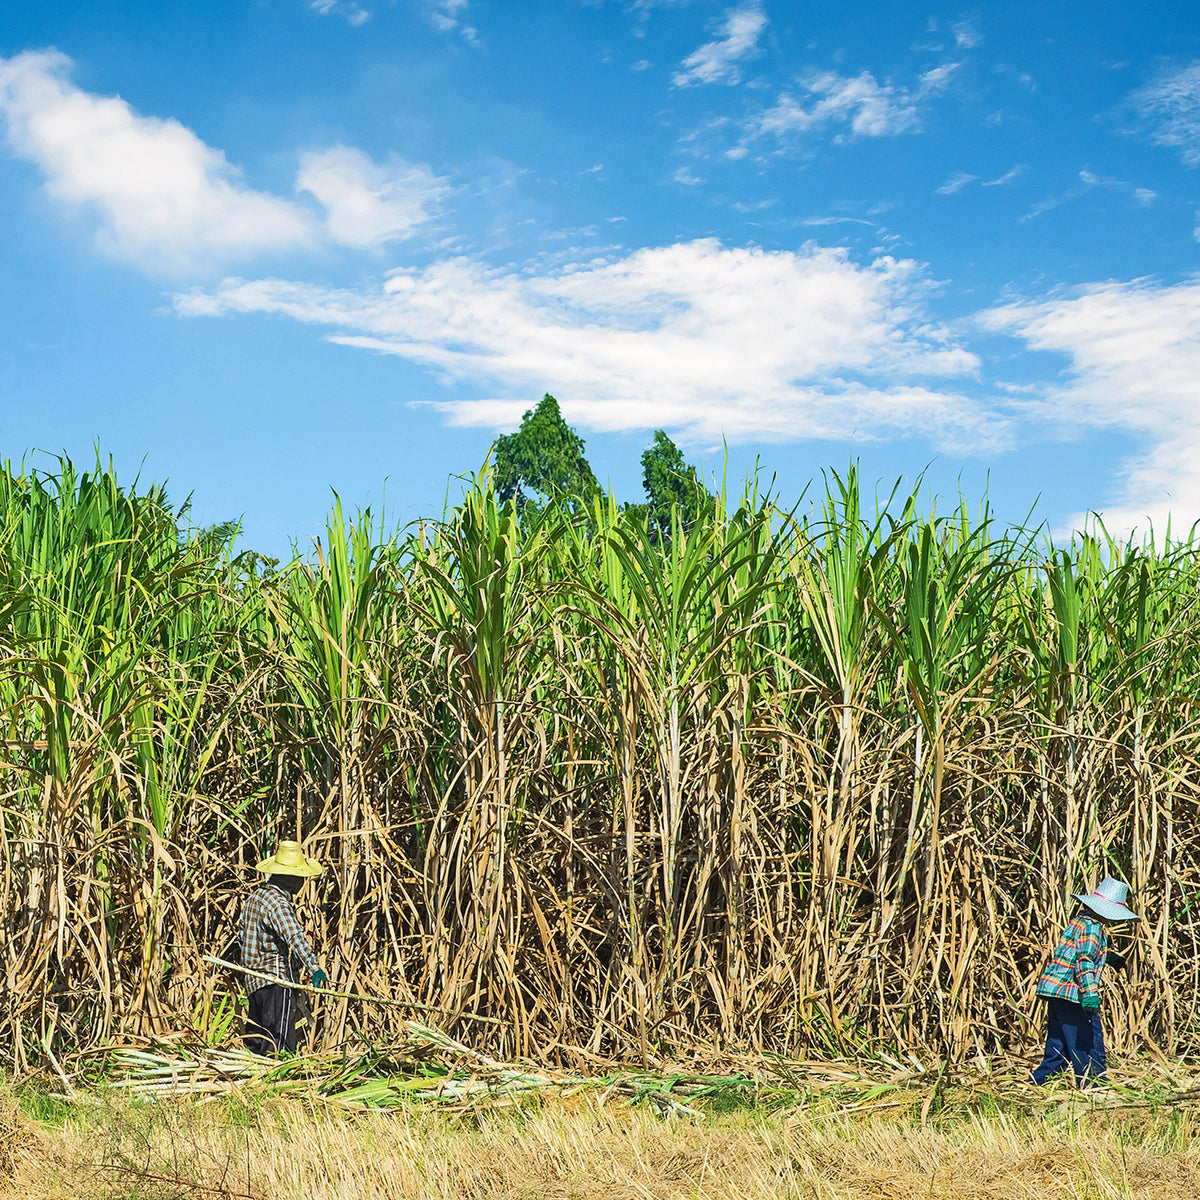 Image of people working in fields